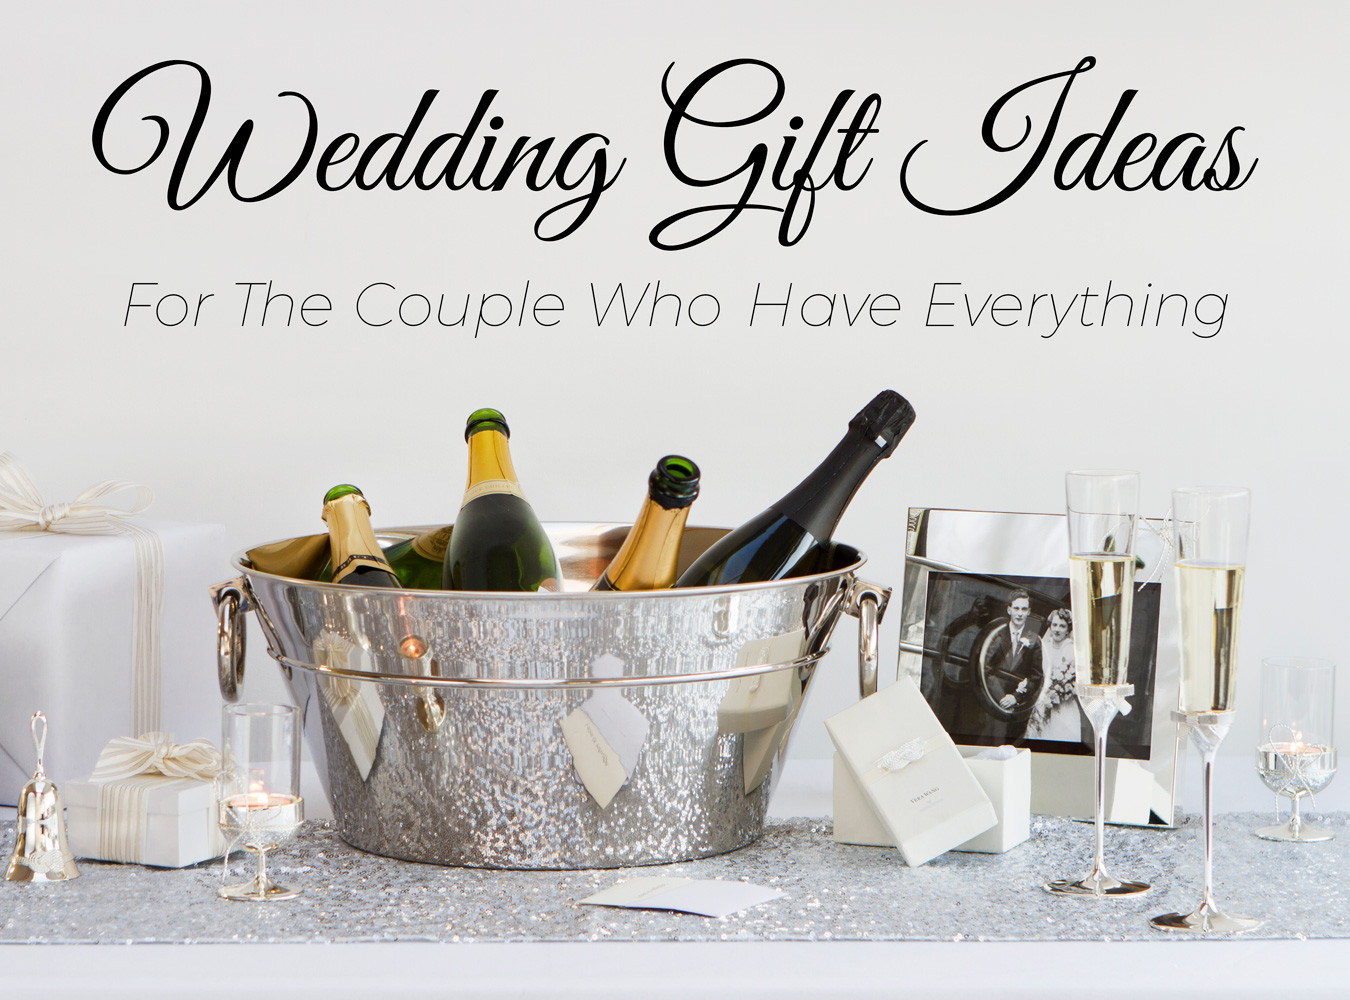 Wedding Gift Ideas For Older Couples Second Marriage
 5 Wedding Gift Ideas for the Couple Who Have Everything